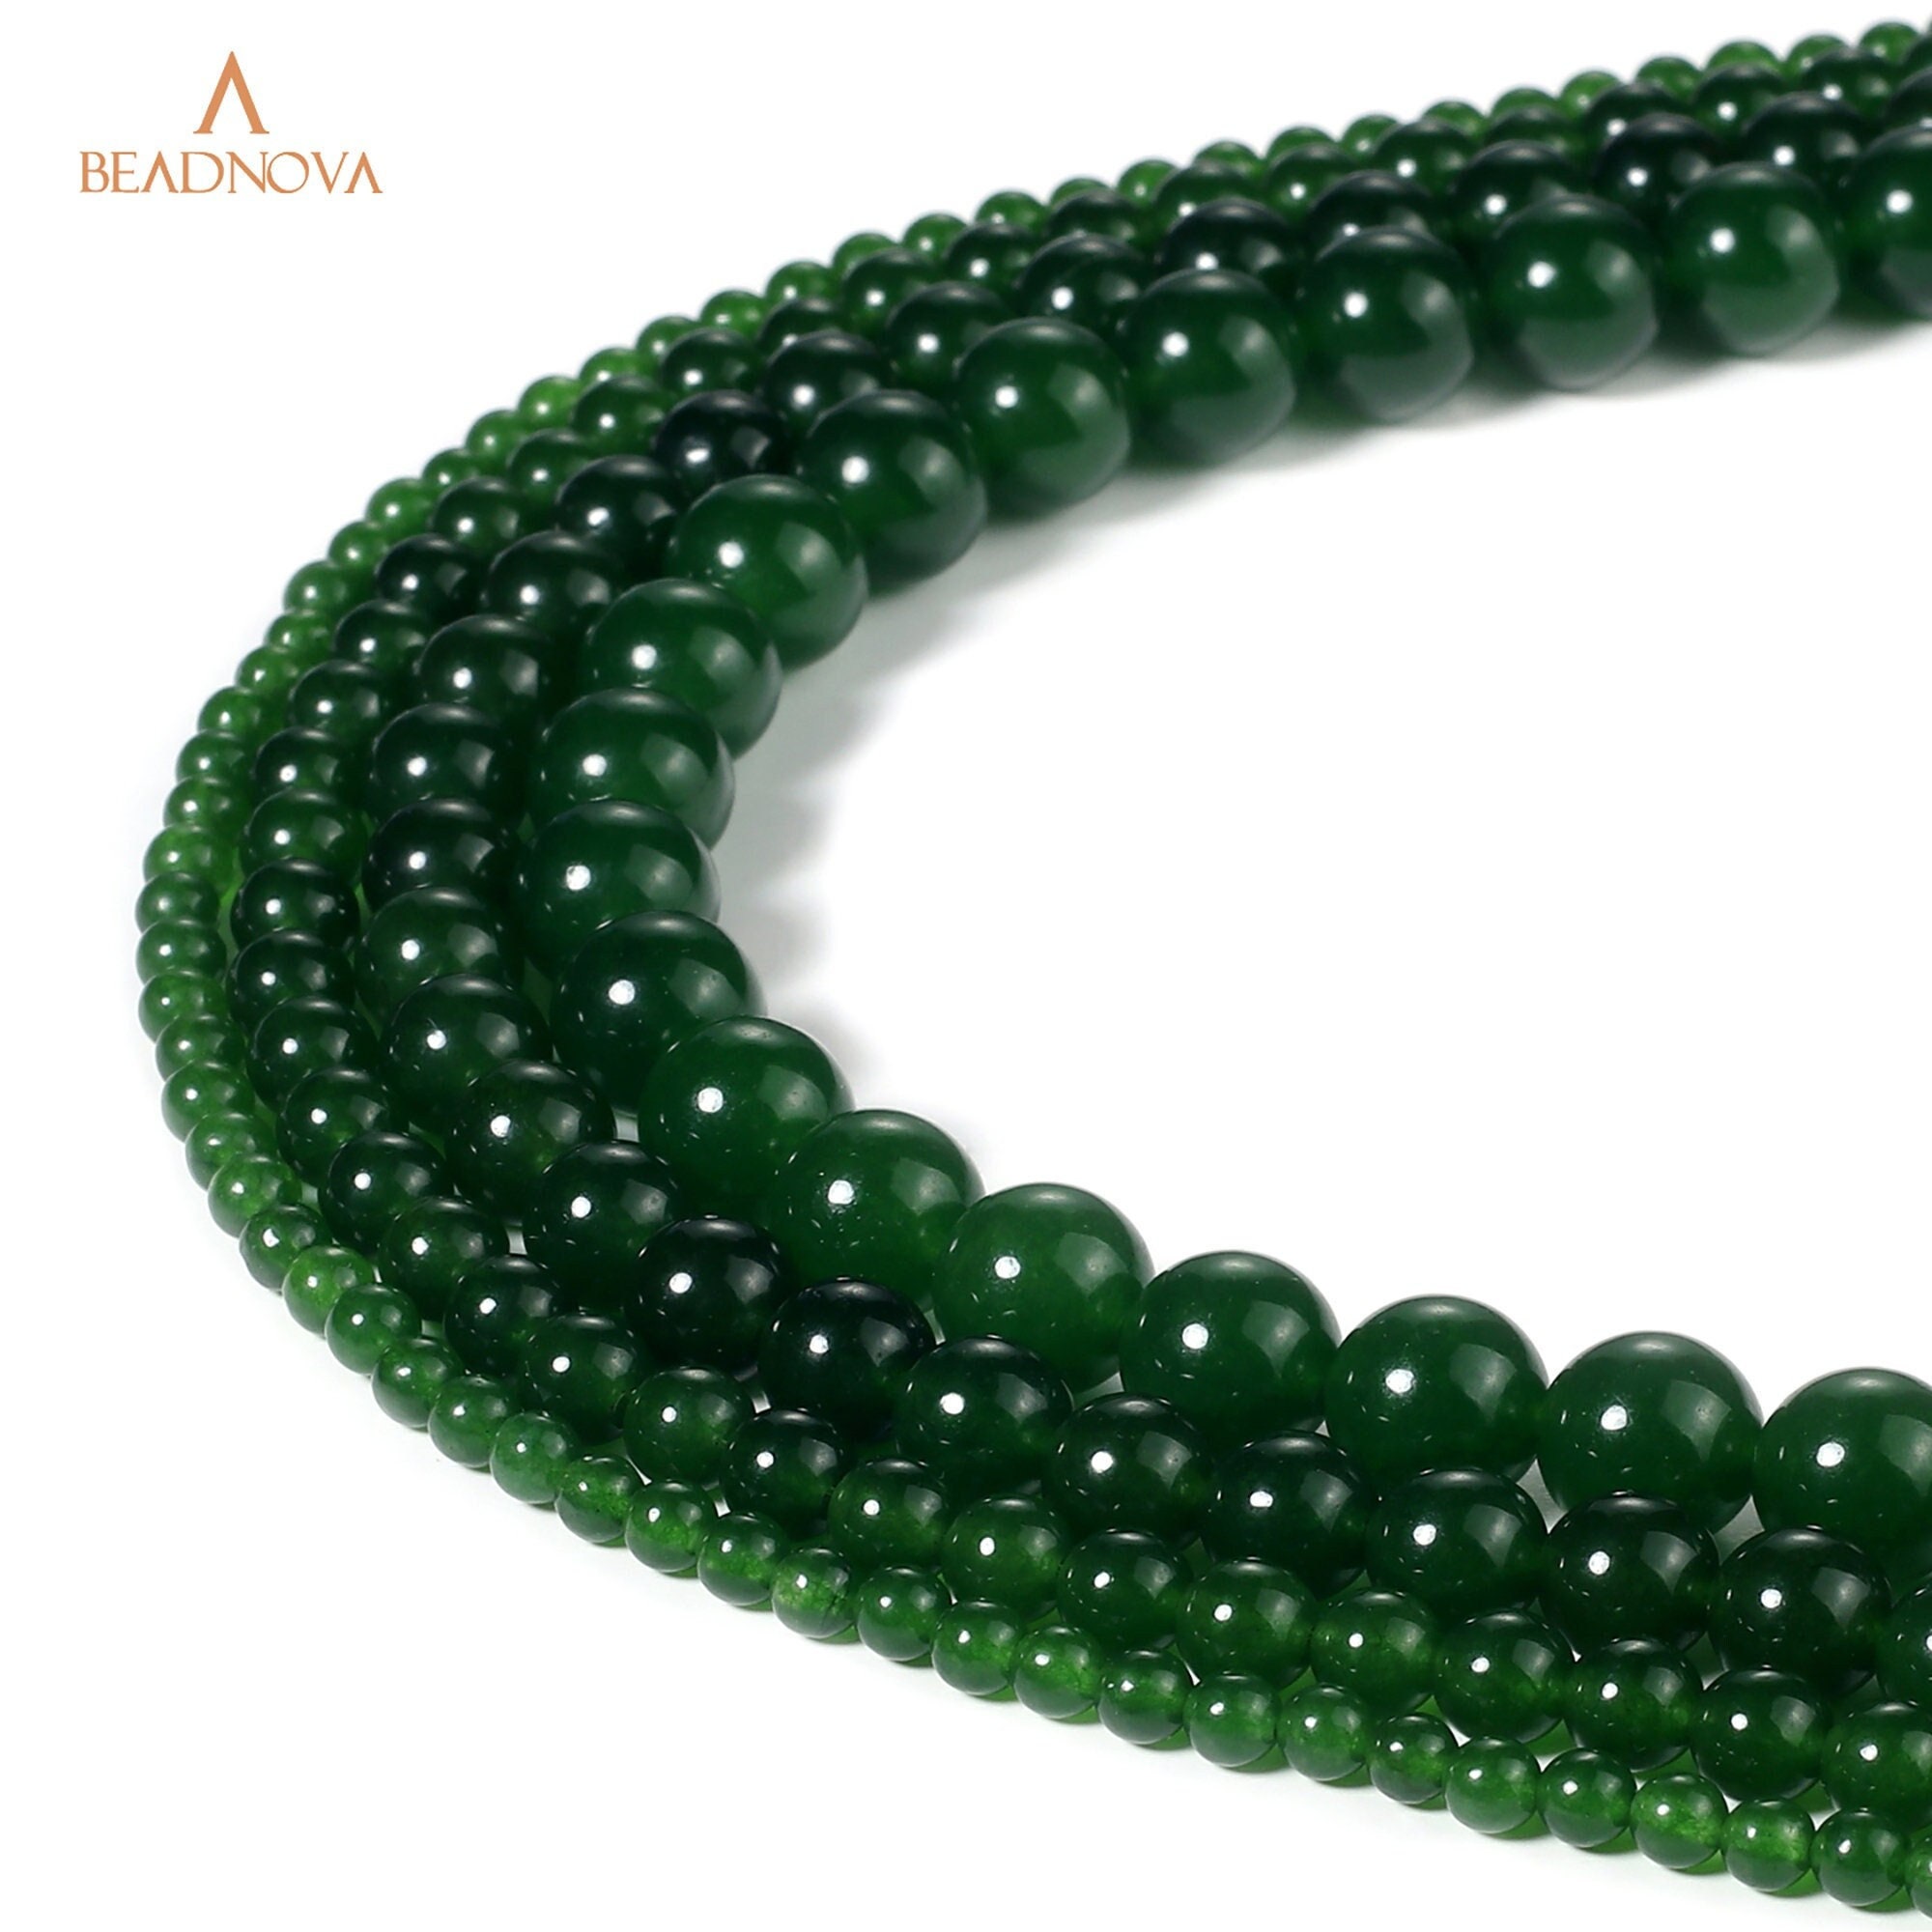 Glass Beads for Jewelry Making Kit, 8MM Imitating Natural Jade Bracelets  Beads Kit - with Jump Rings